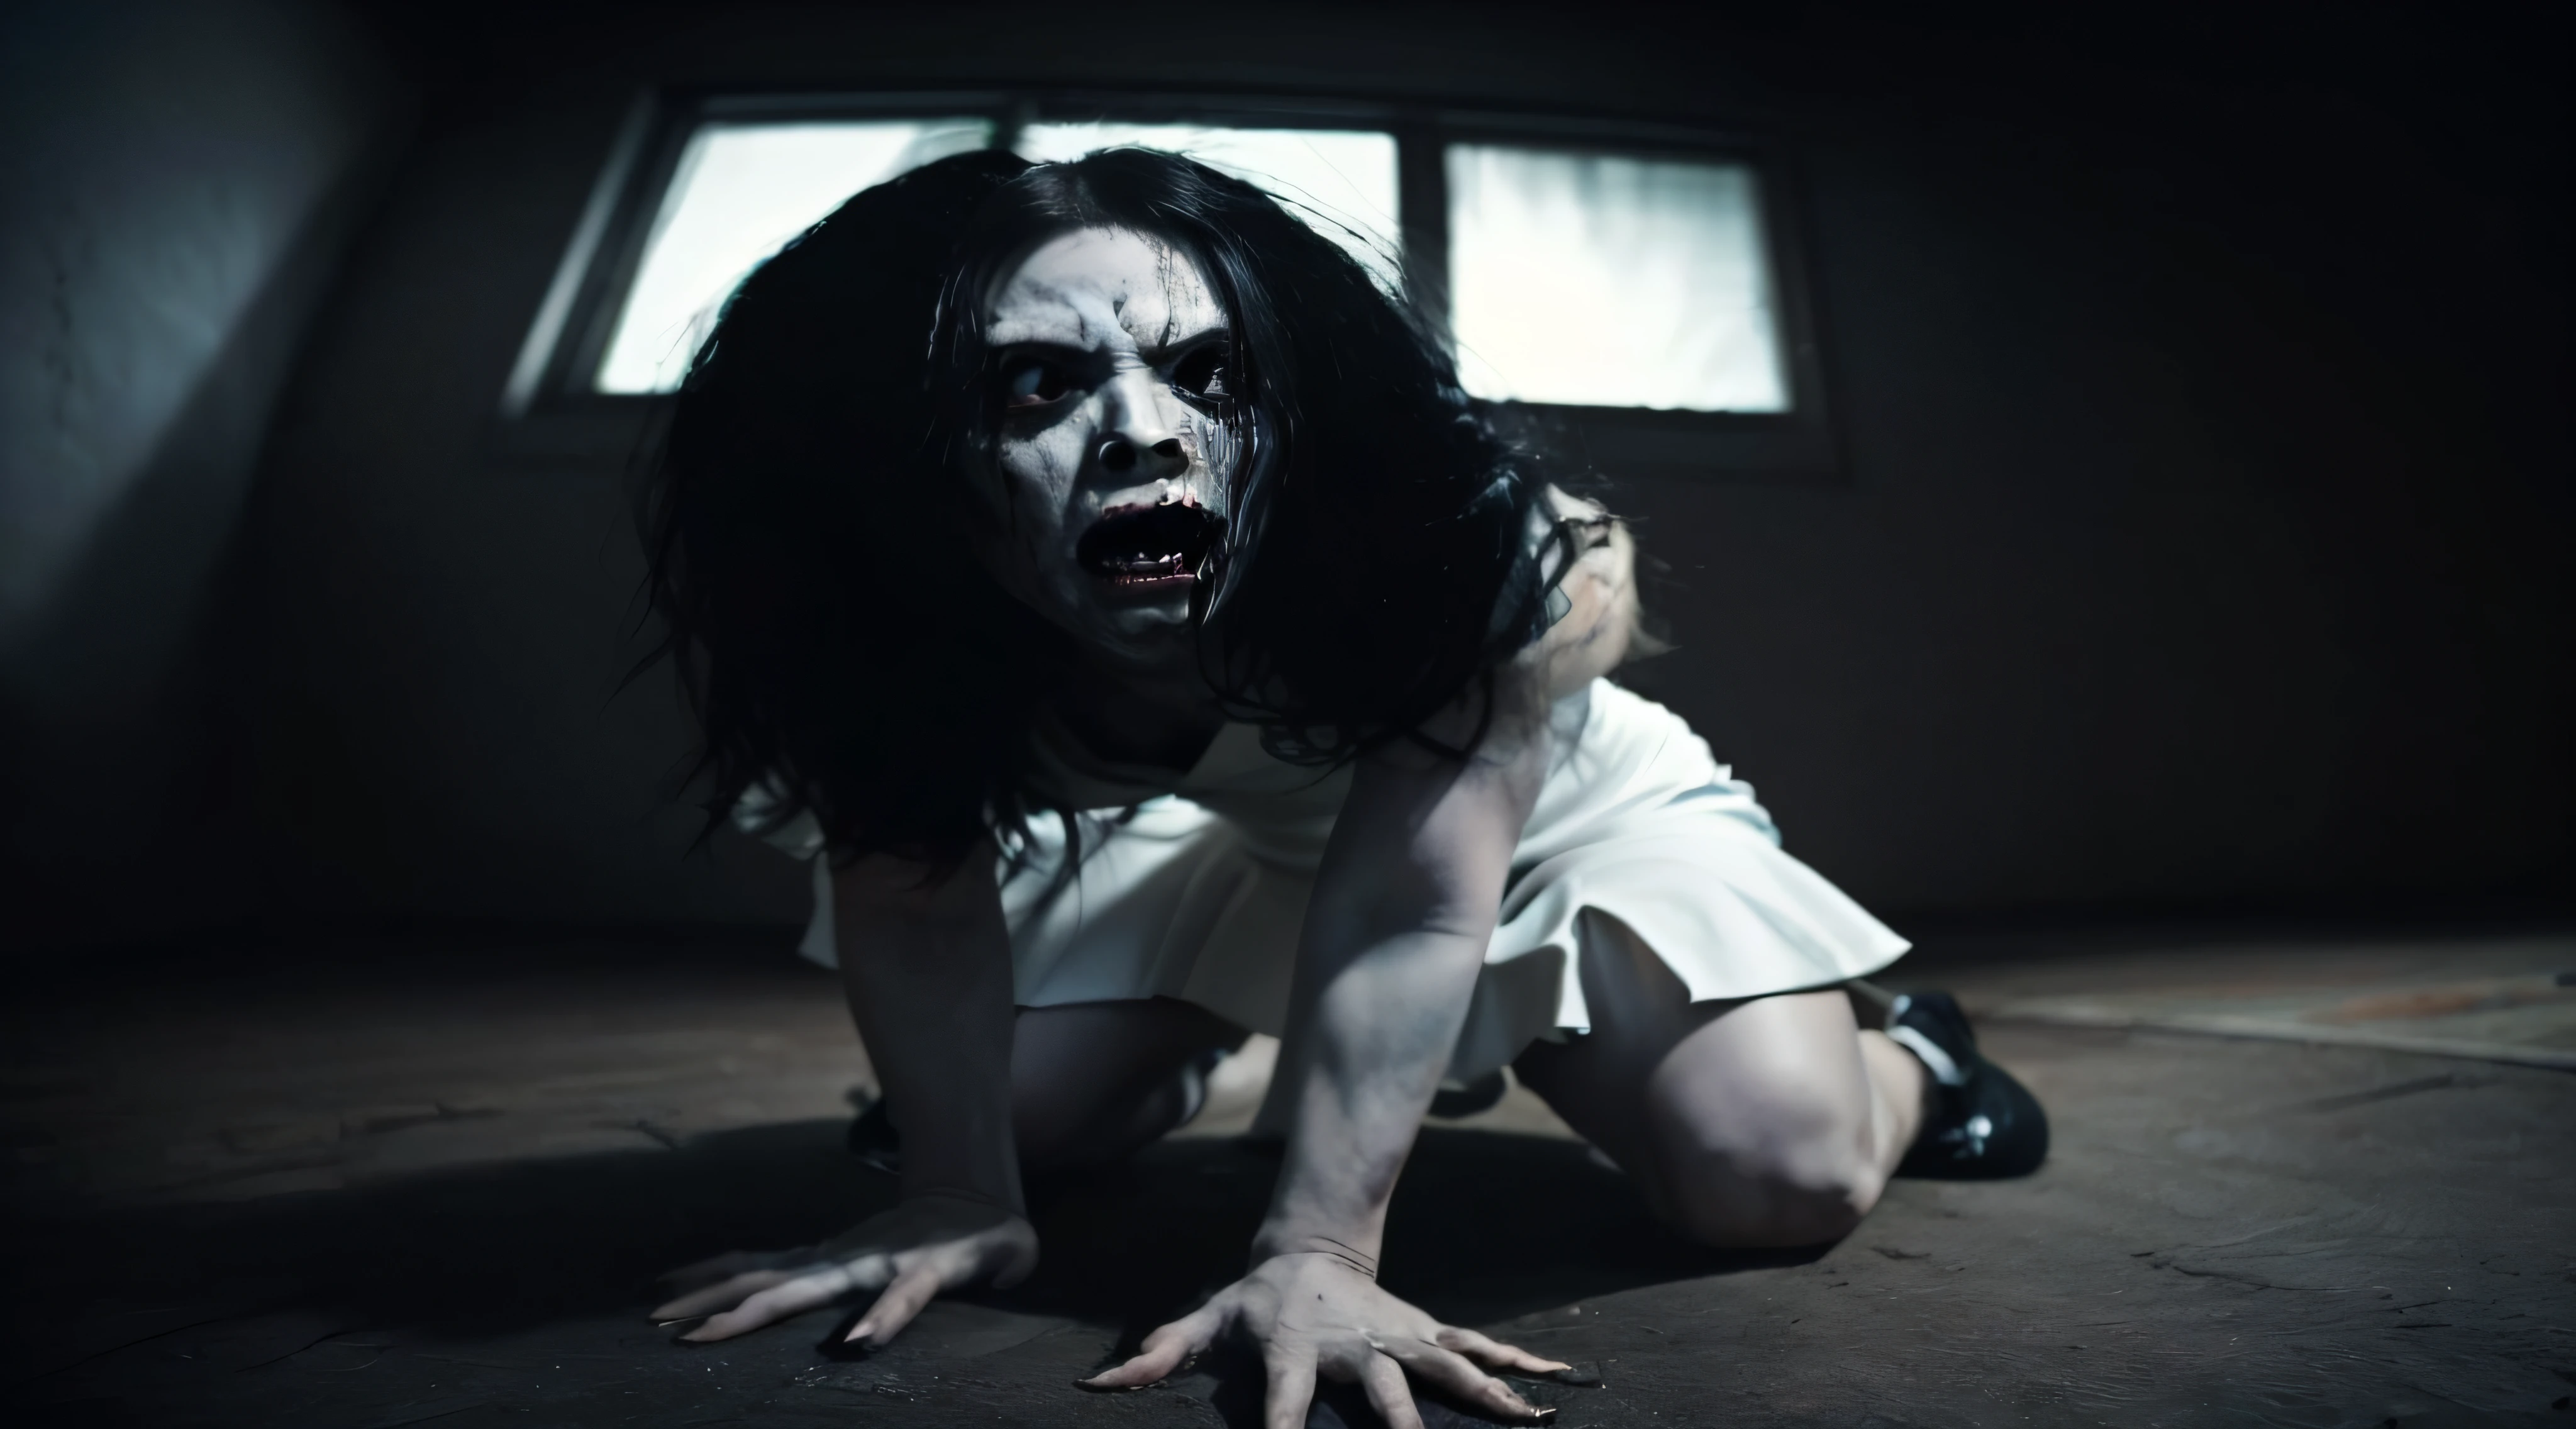 arafed woman in white dress and black makeup crouching down, the grudge, portrait of sadako of the ring, japanese horror, japanese horror movie footage, horror photography, horror photo, still from horror movie, scary pose, horror movie still, film still from a horror movie, very scary photo, crawling out of a dark room, scary photo